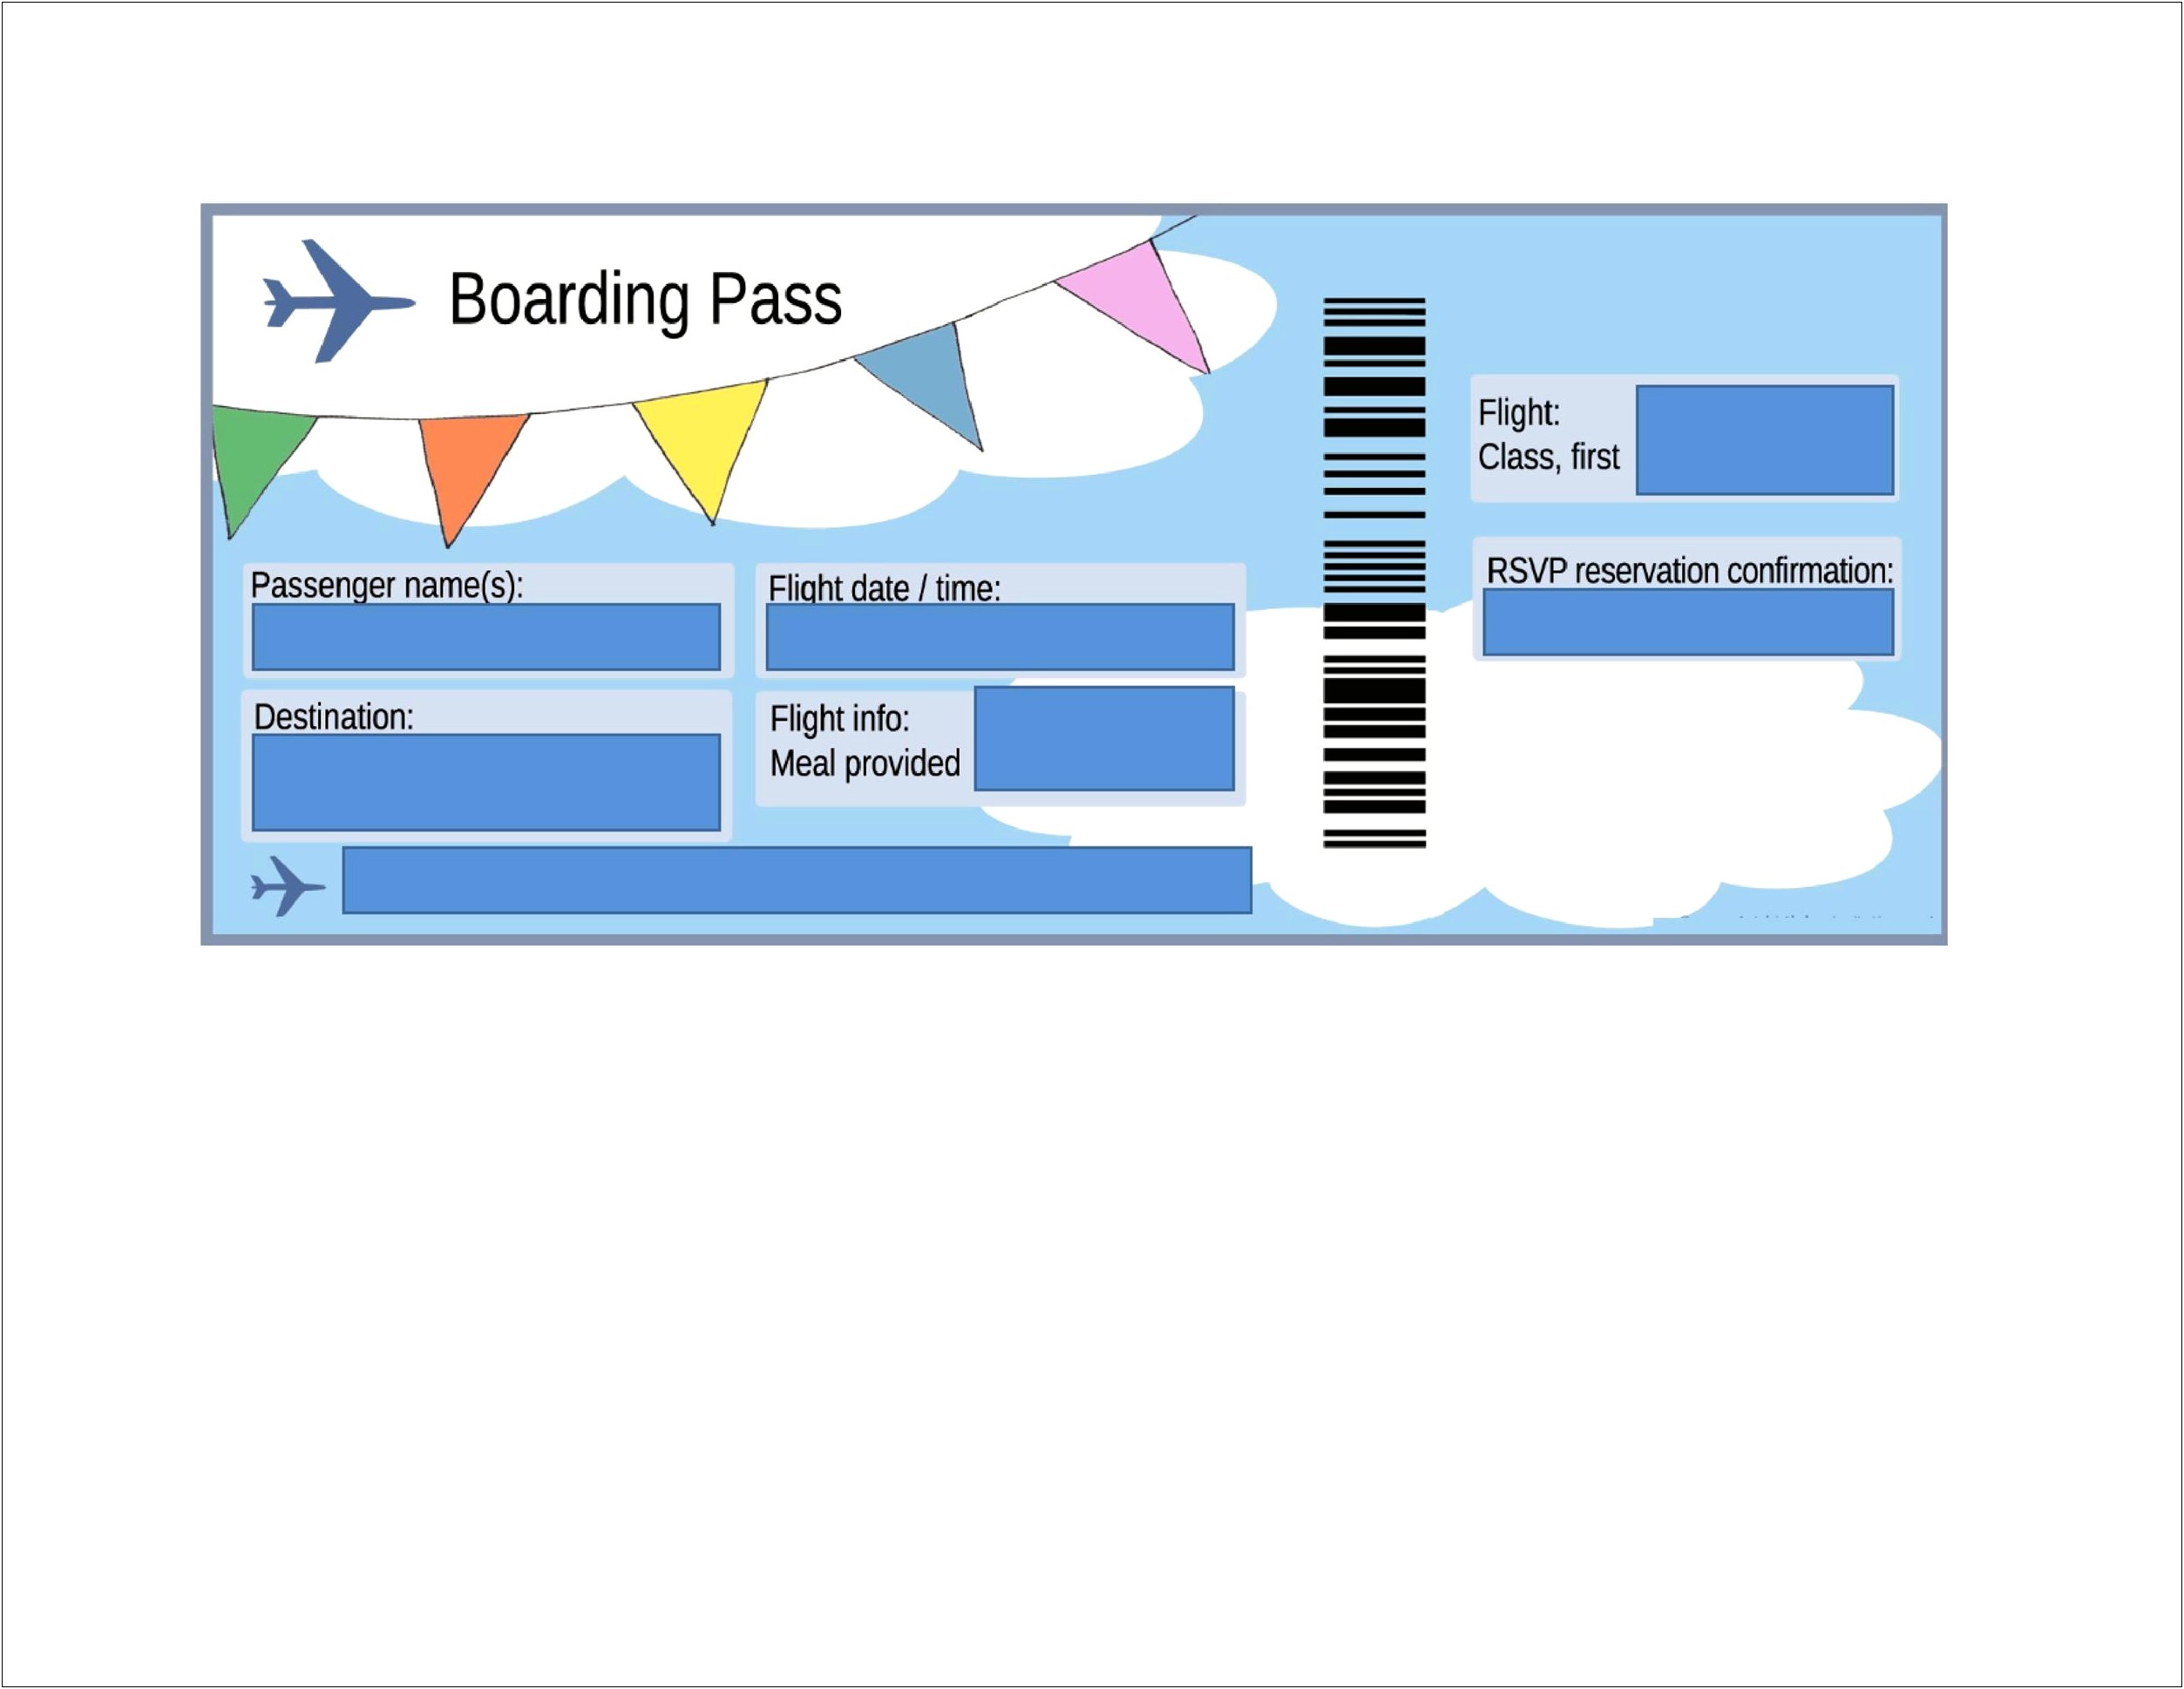 free-printable-cruise-boarding-pass-template-templates-resume-designs-xrvynbvgzl